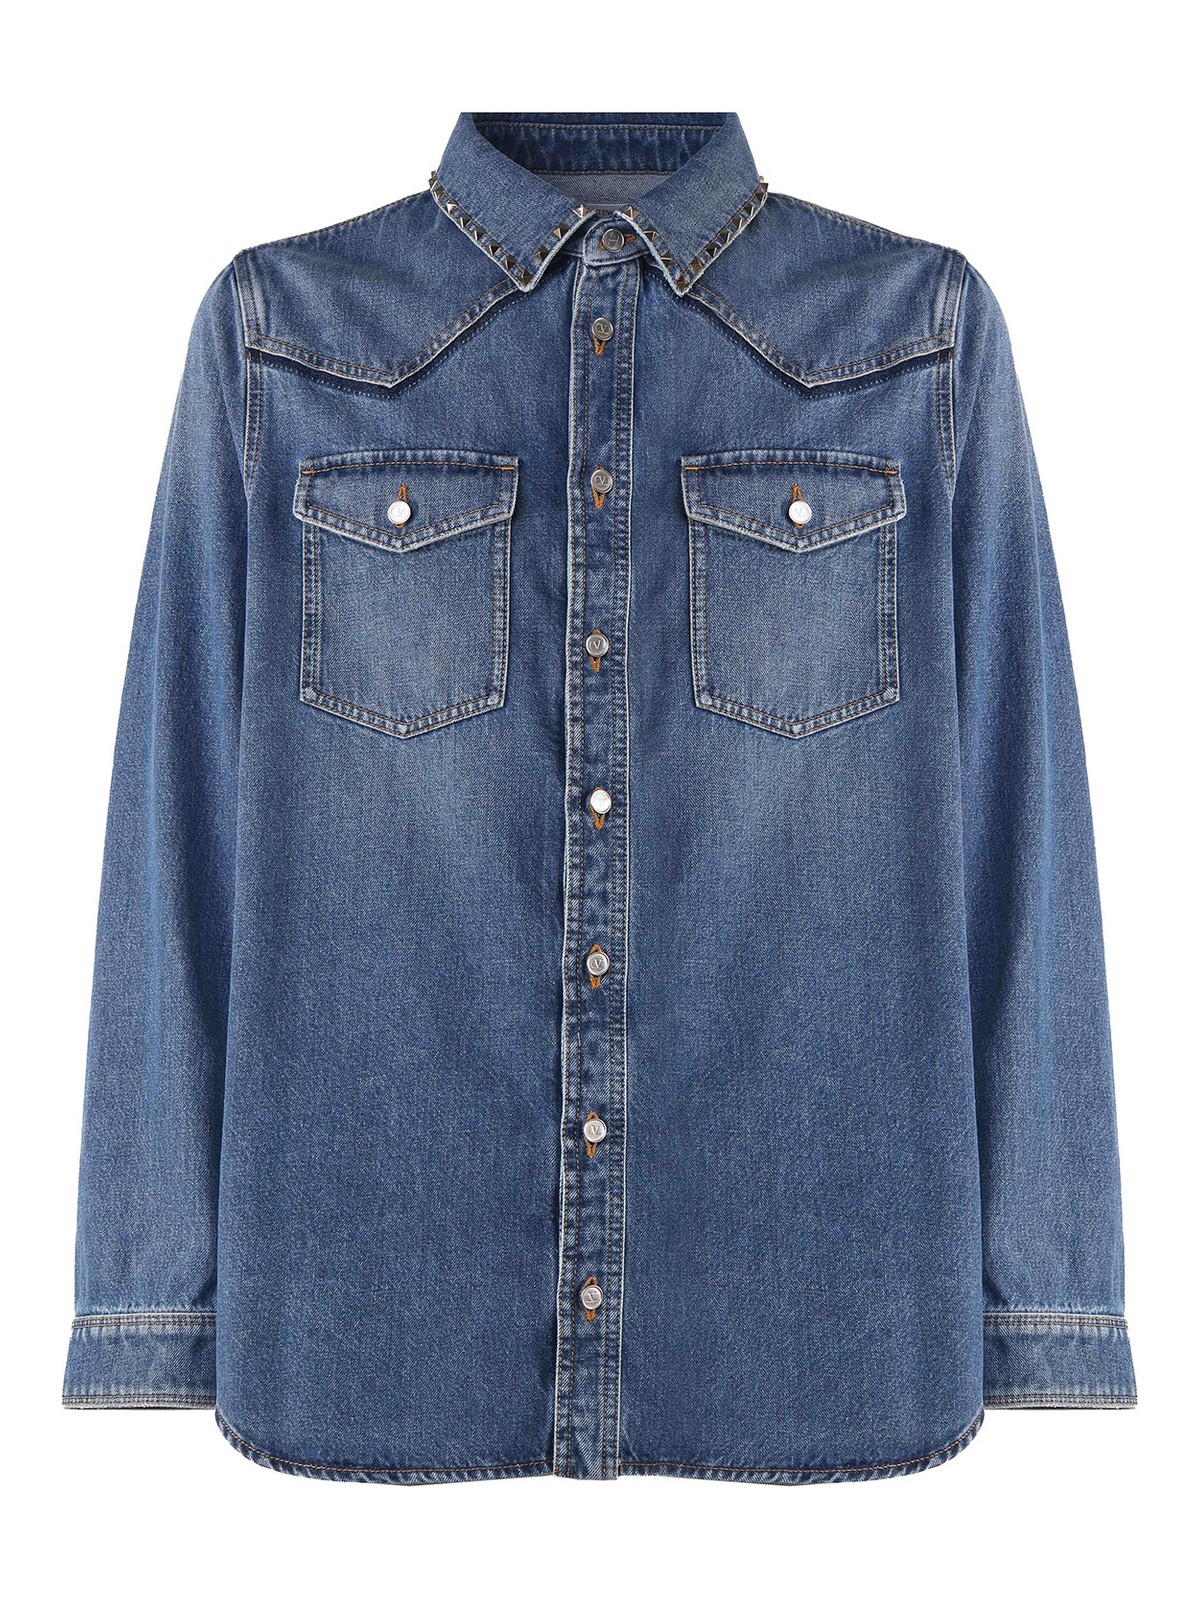 Valentino Denim Jacket With Contrasting Back In Light Wash